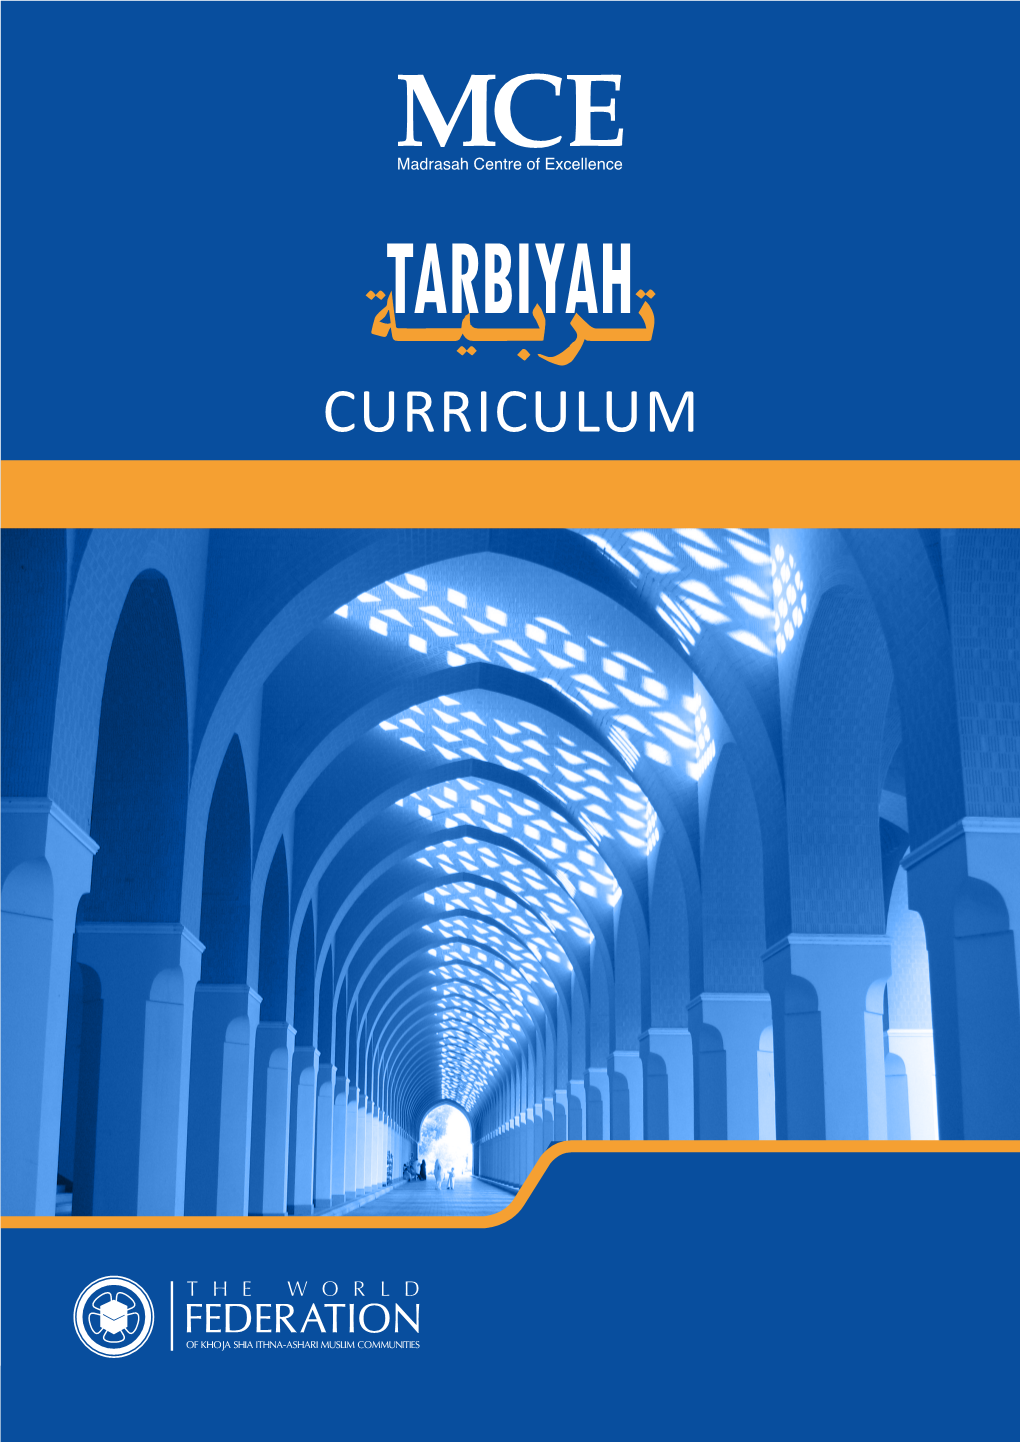 The Tarbiyah Curriculum for Strong Character and Spiritual Development Your Madrasah, It Is These Questions of What in Our Children